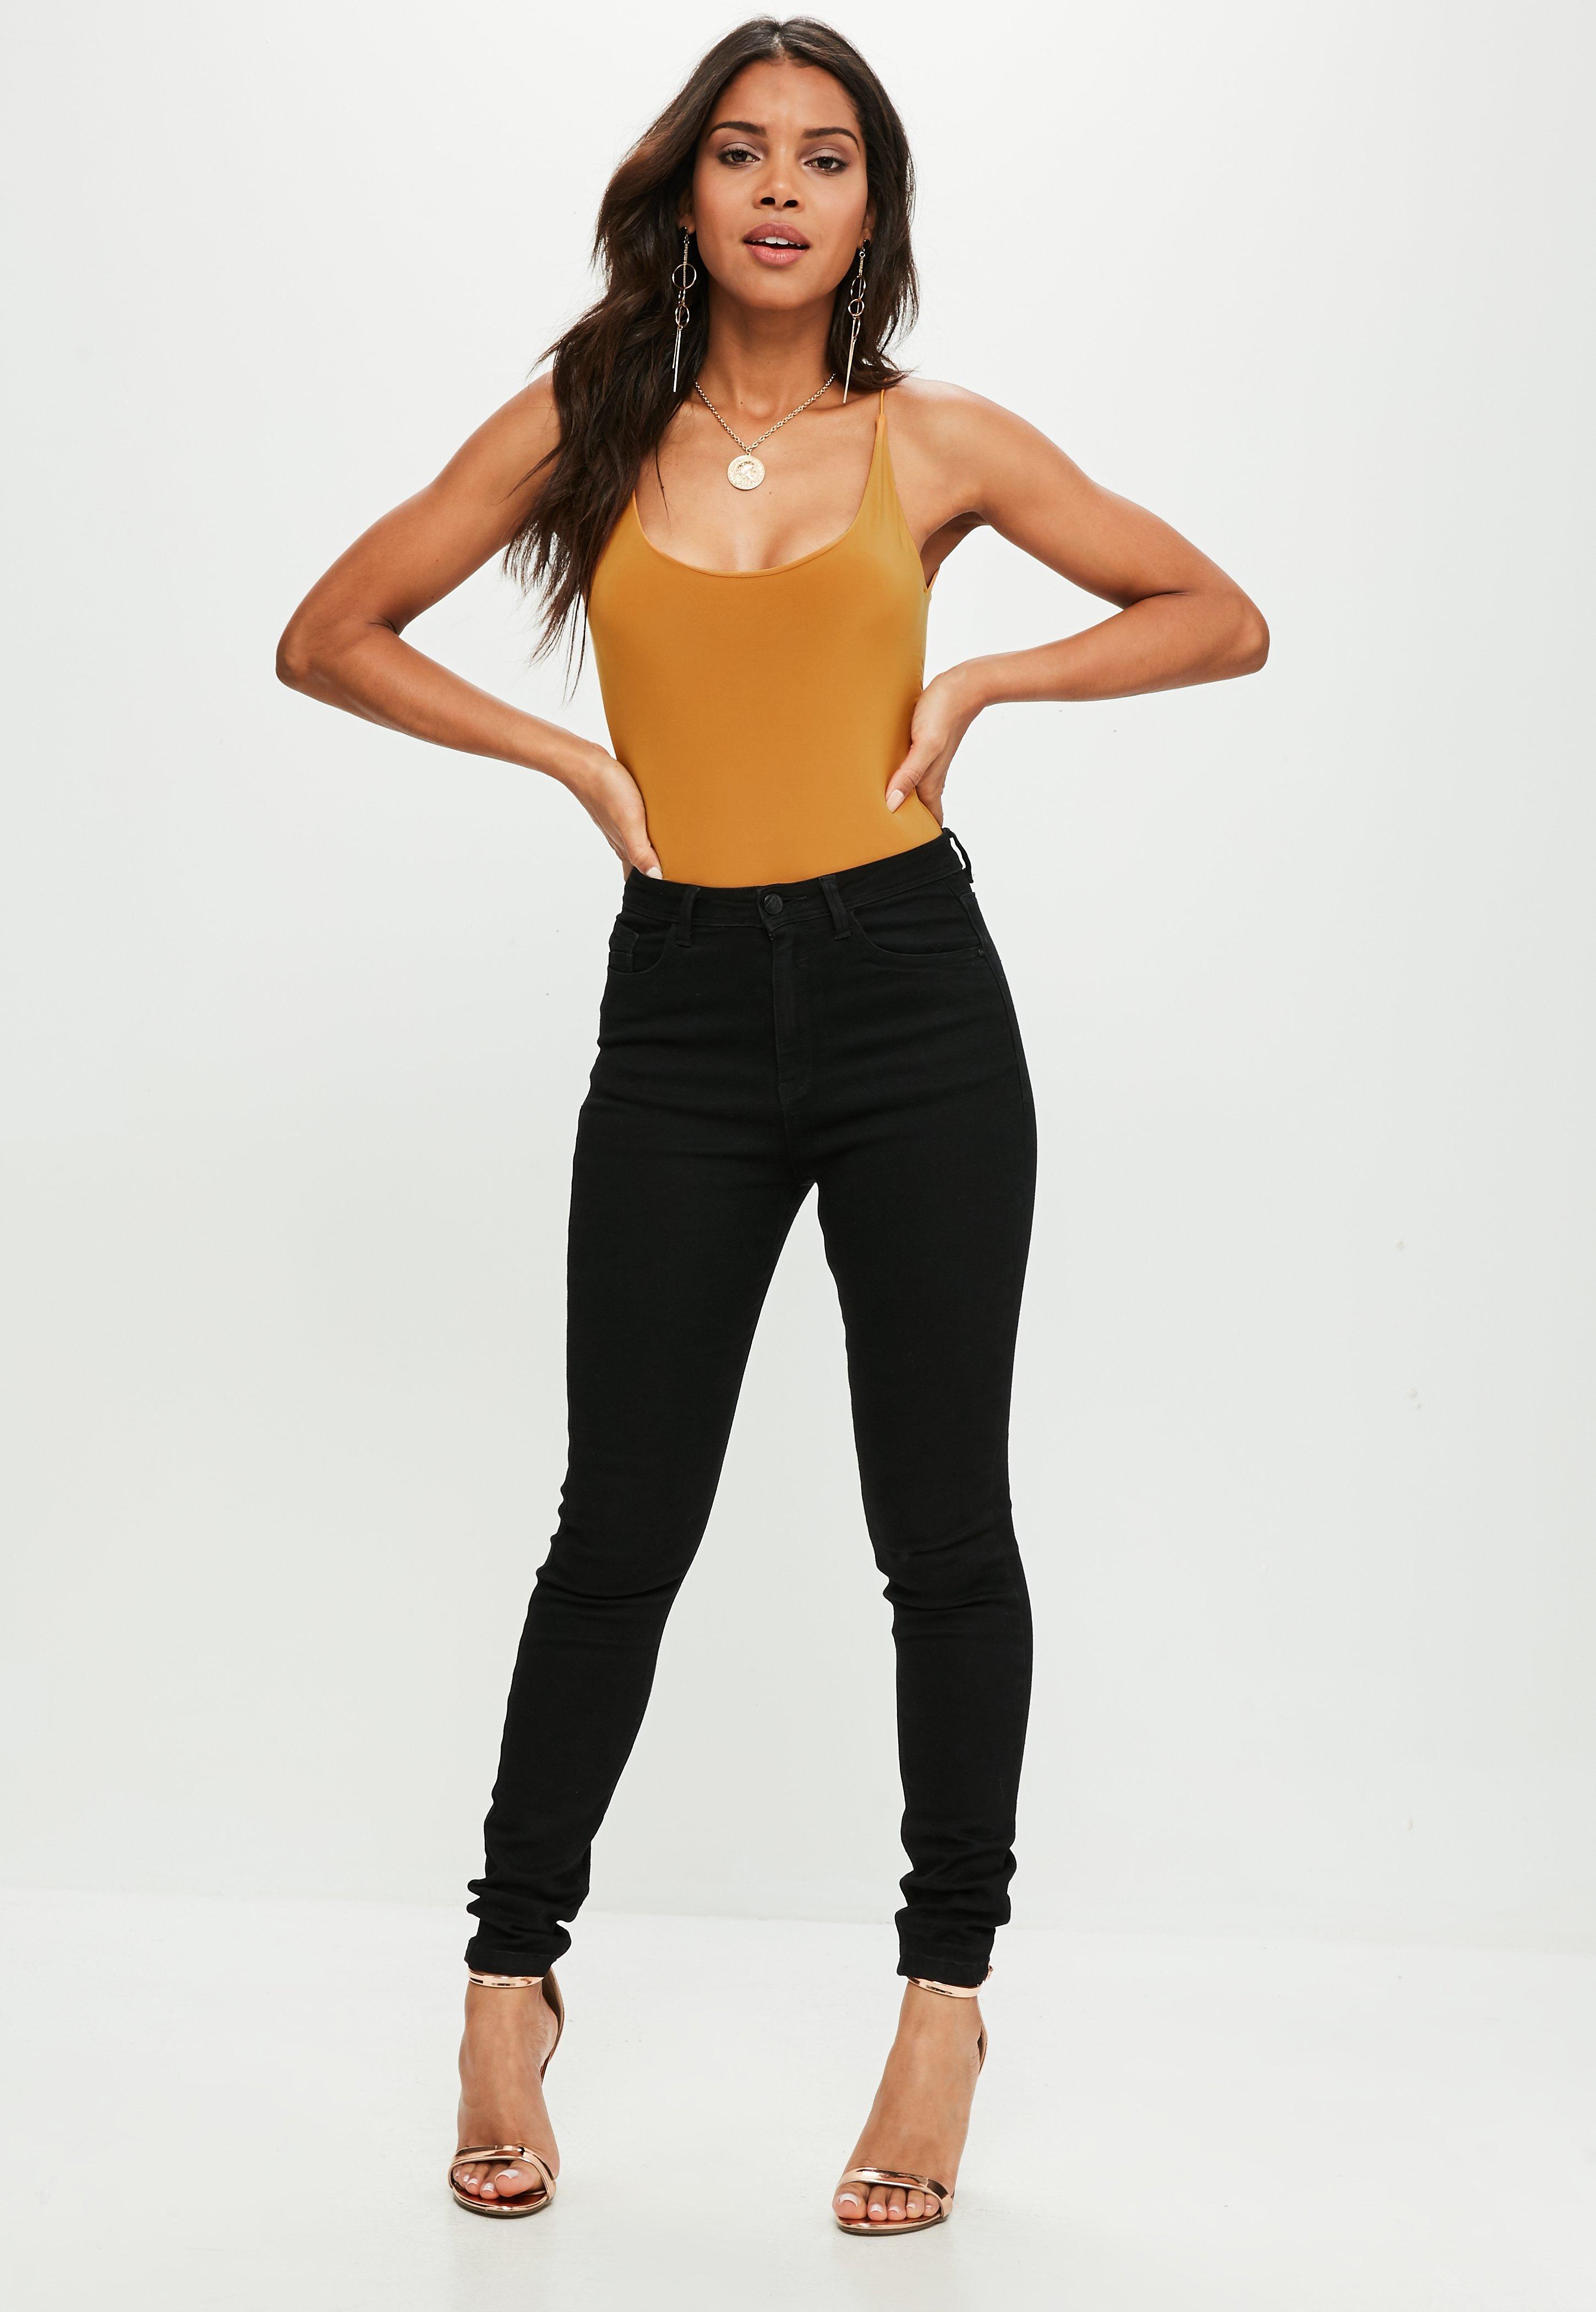 Lyst - Missguided Yellow Slinky Bodysuit in Yellow